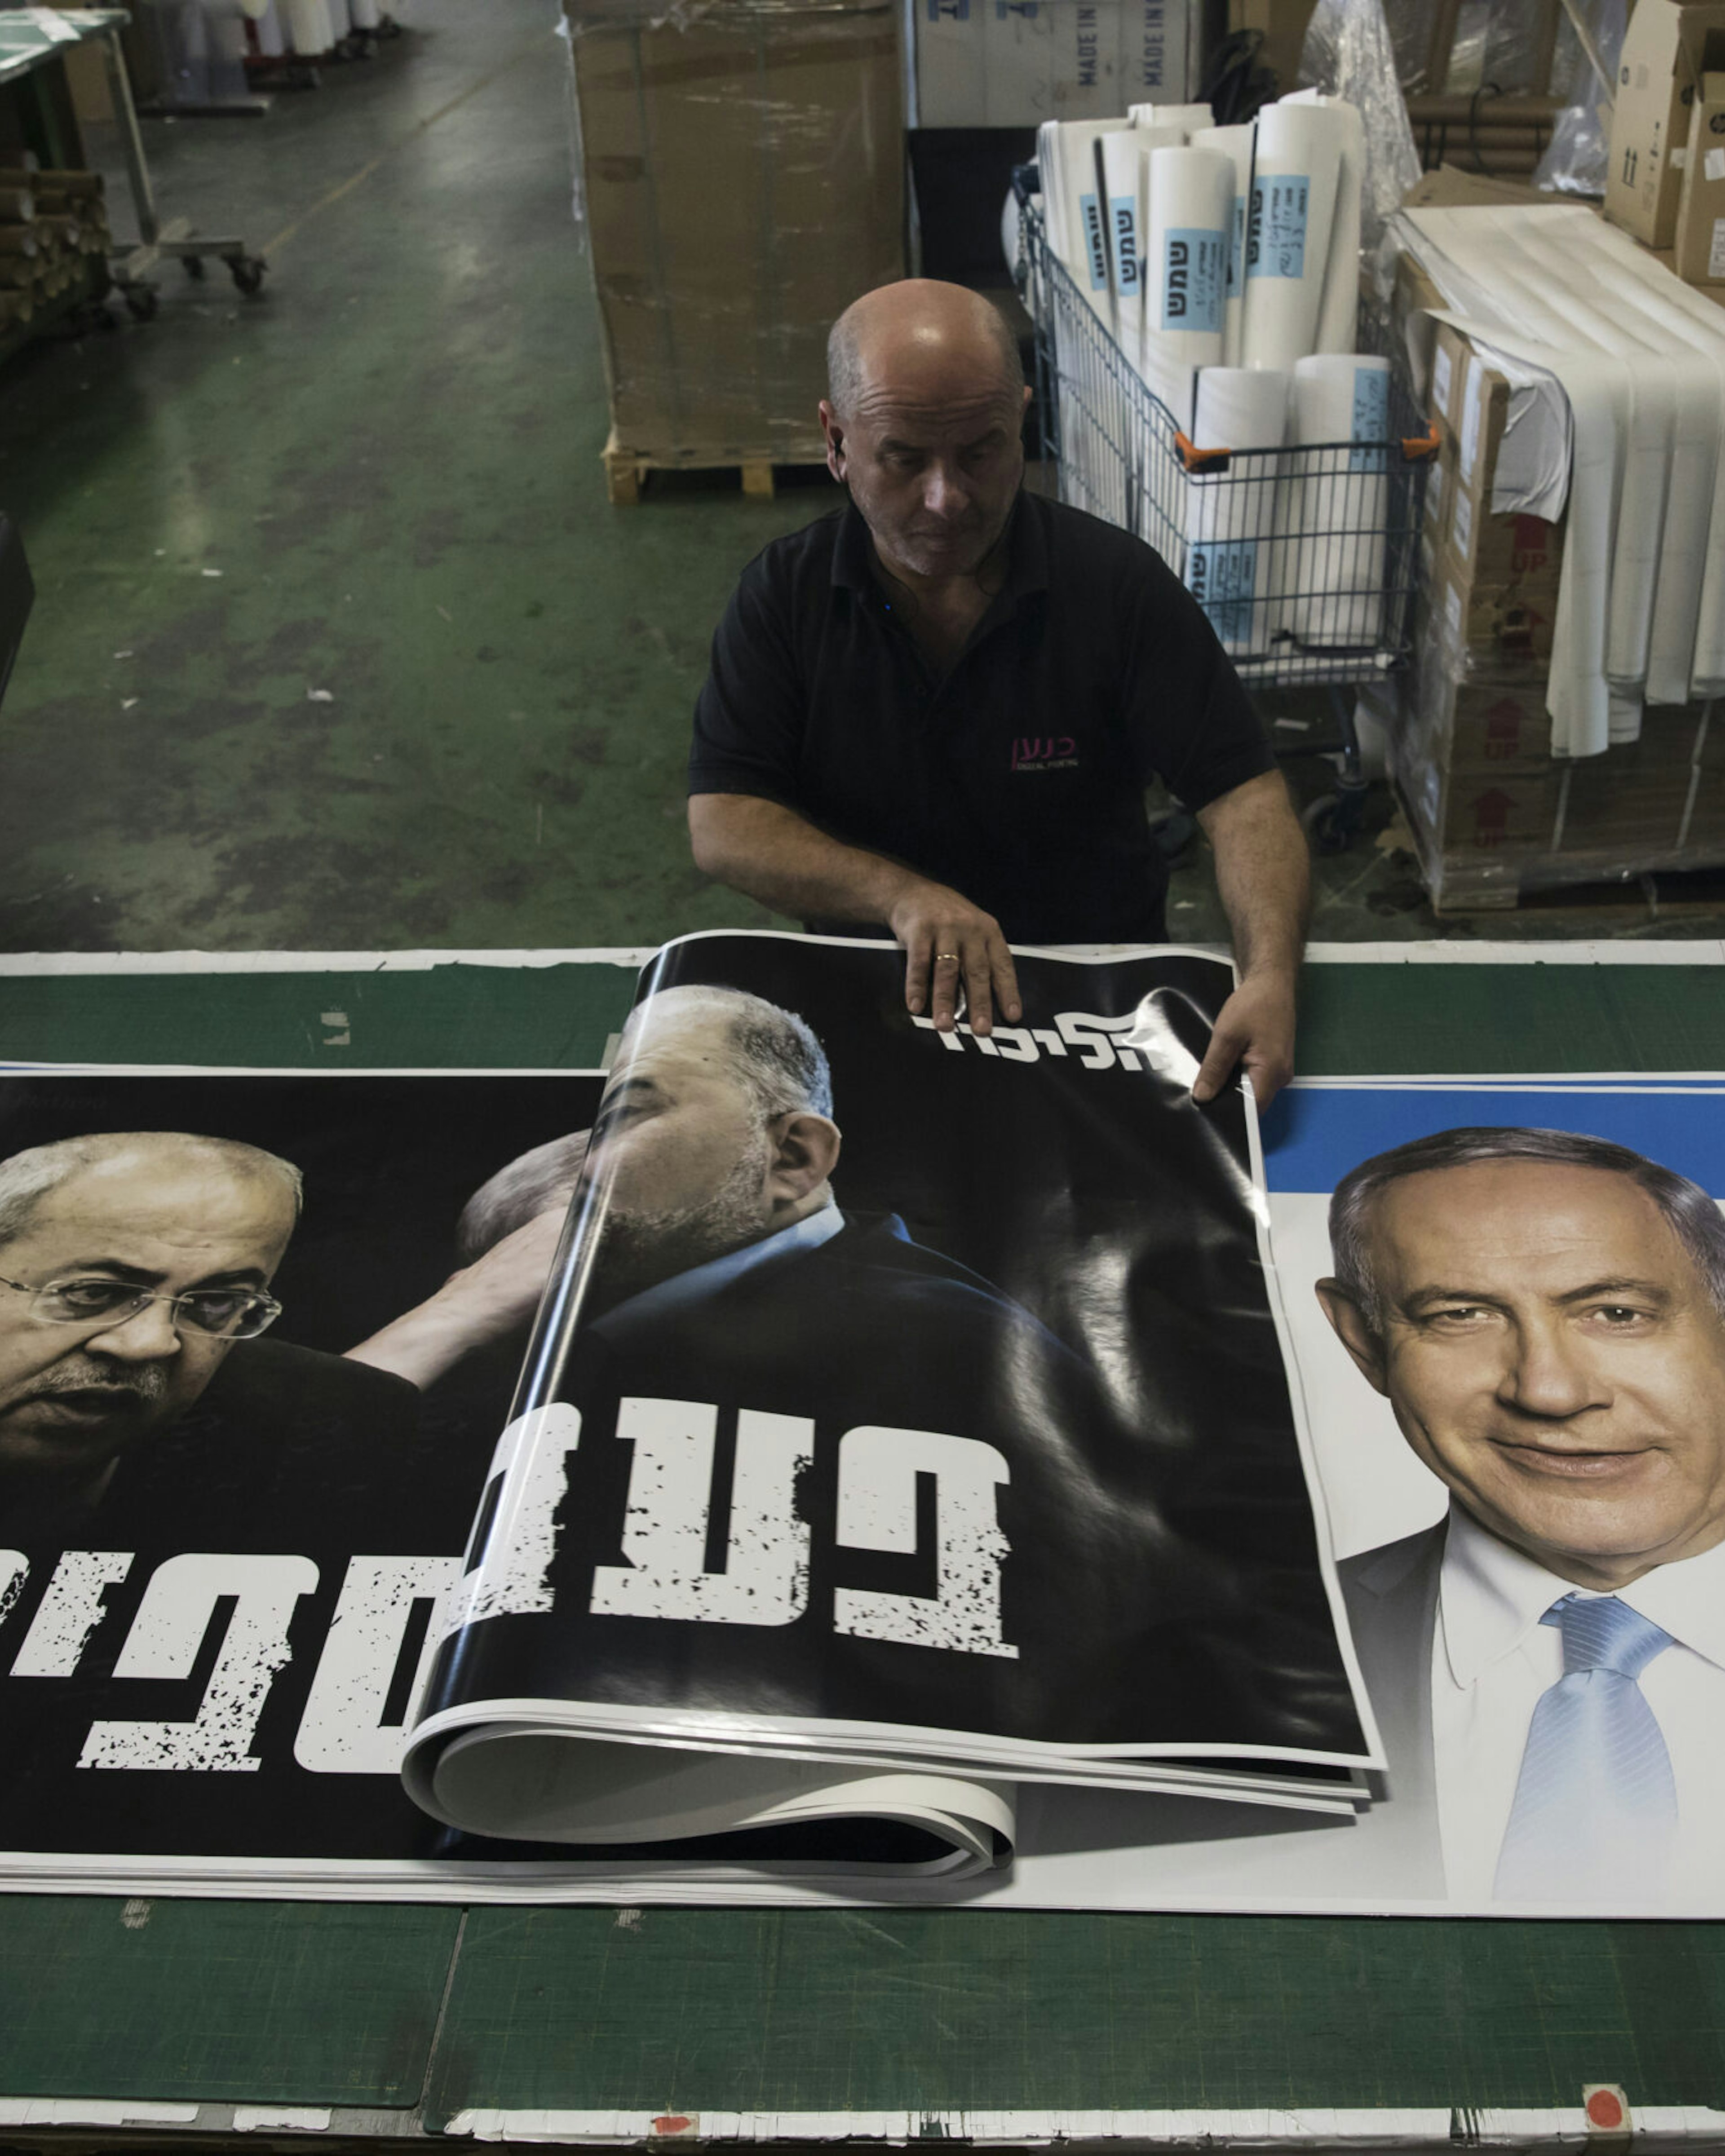 A print house worker rolls up a Likud party election campaign posters that show former Israeli Prime Minister and Likud Party leader Benjamin Netanyahu and member of parliament Ahmad Tibi on October 19, 2022 in Rosh HaAyin, Israel. Legislative elections will be held in Israel on 1 November 2022 to elect the members of the twenty-fifth Knesset.